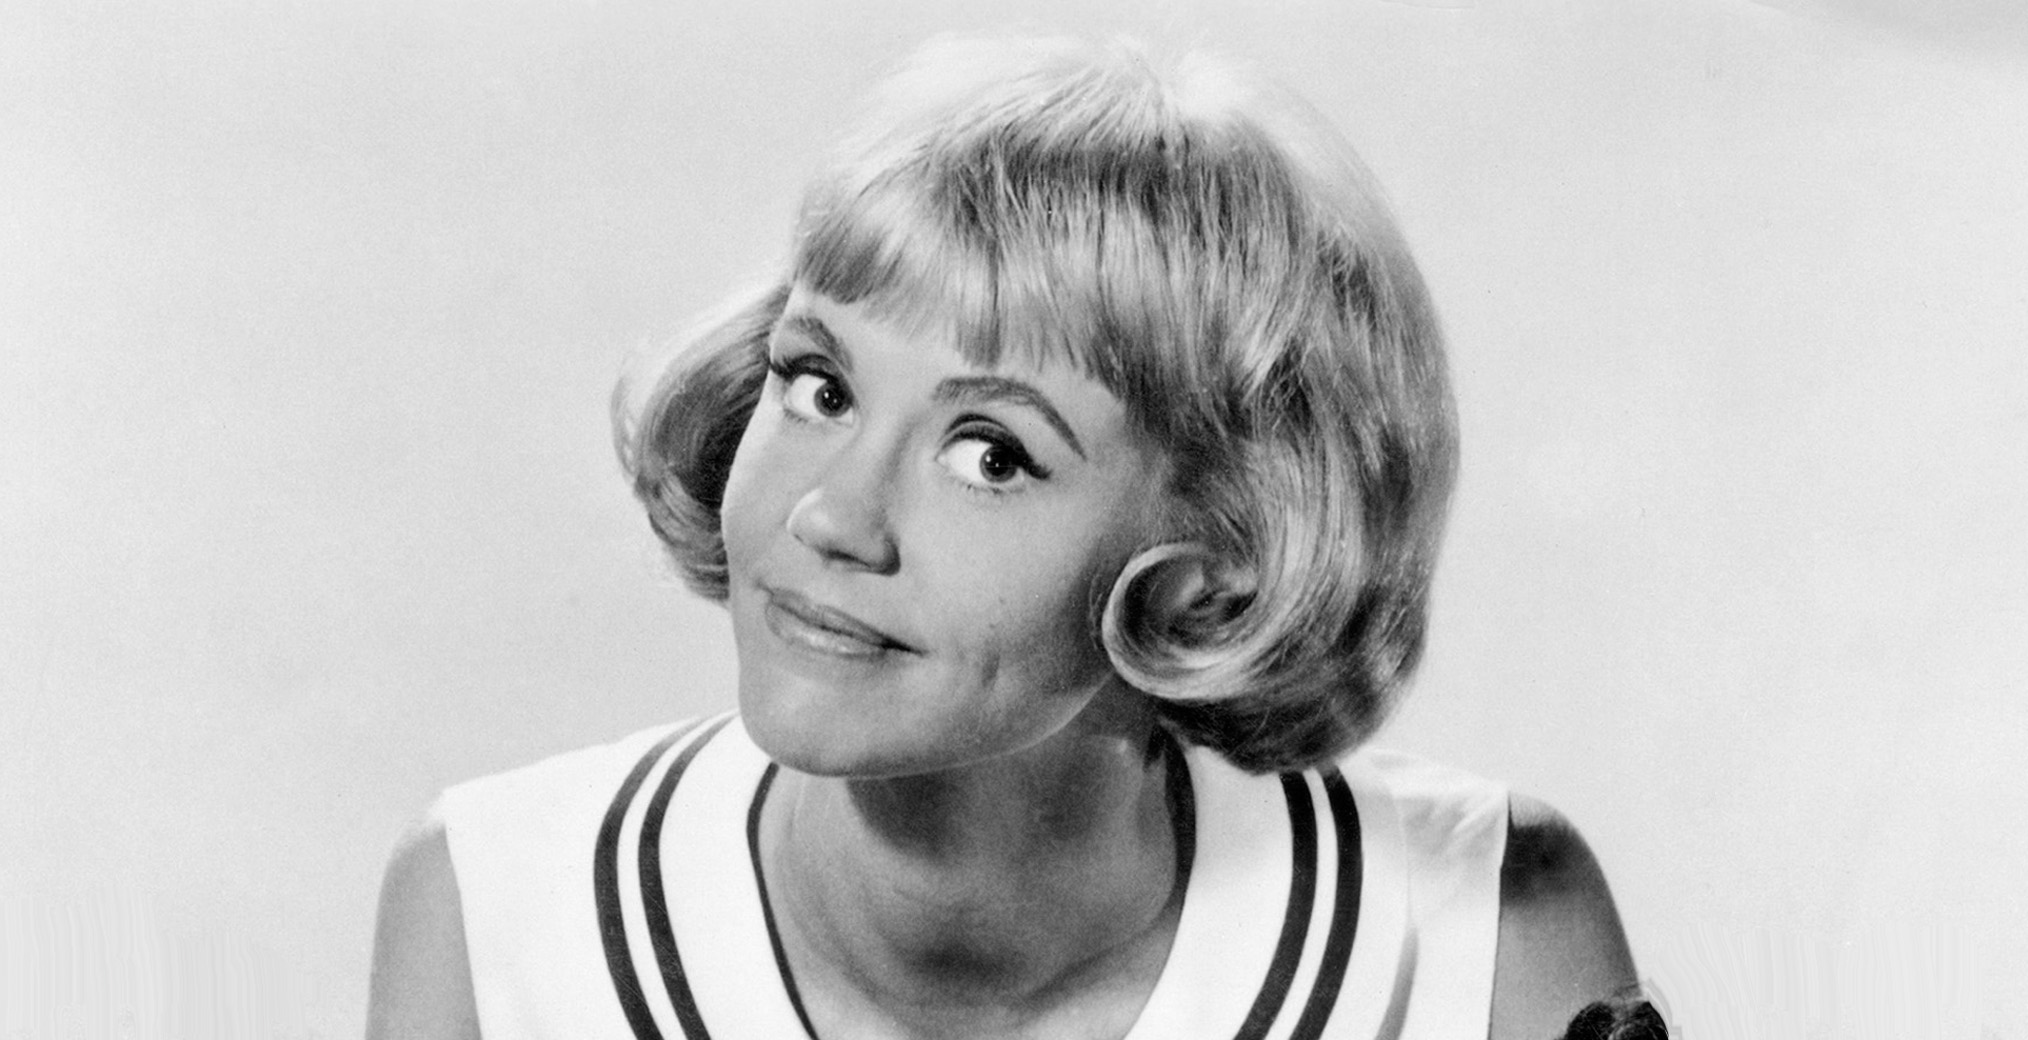 ‘The Andy Griffith Show’ Actress Maggie Peterson Dies at 81